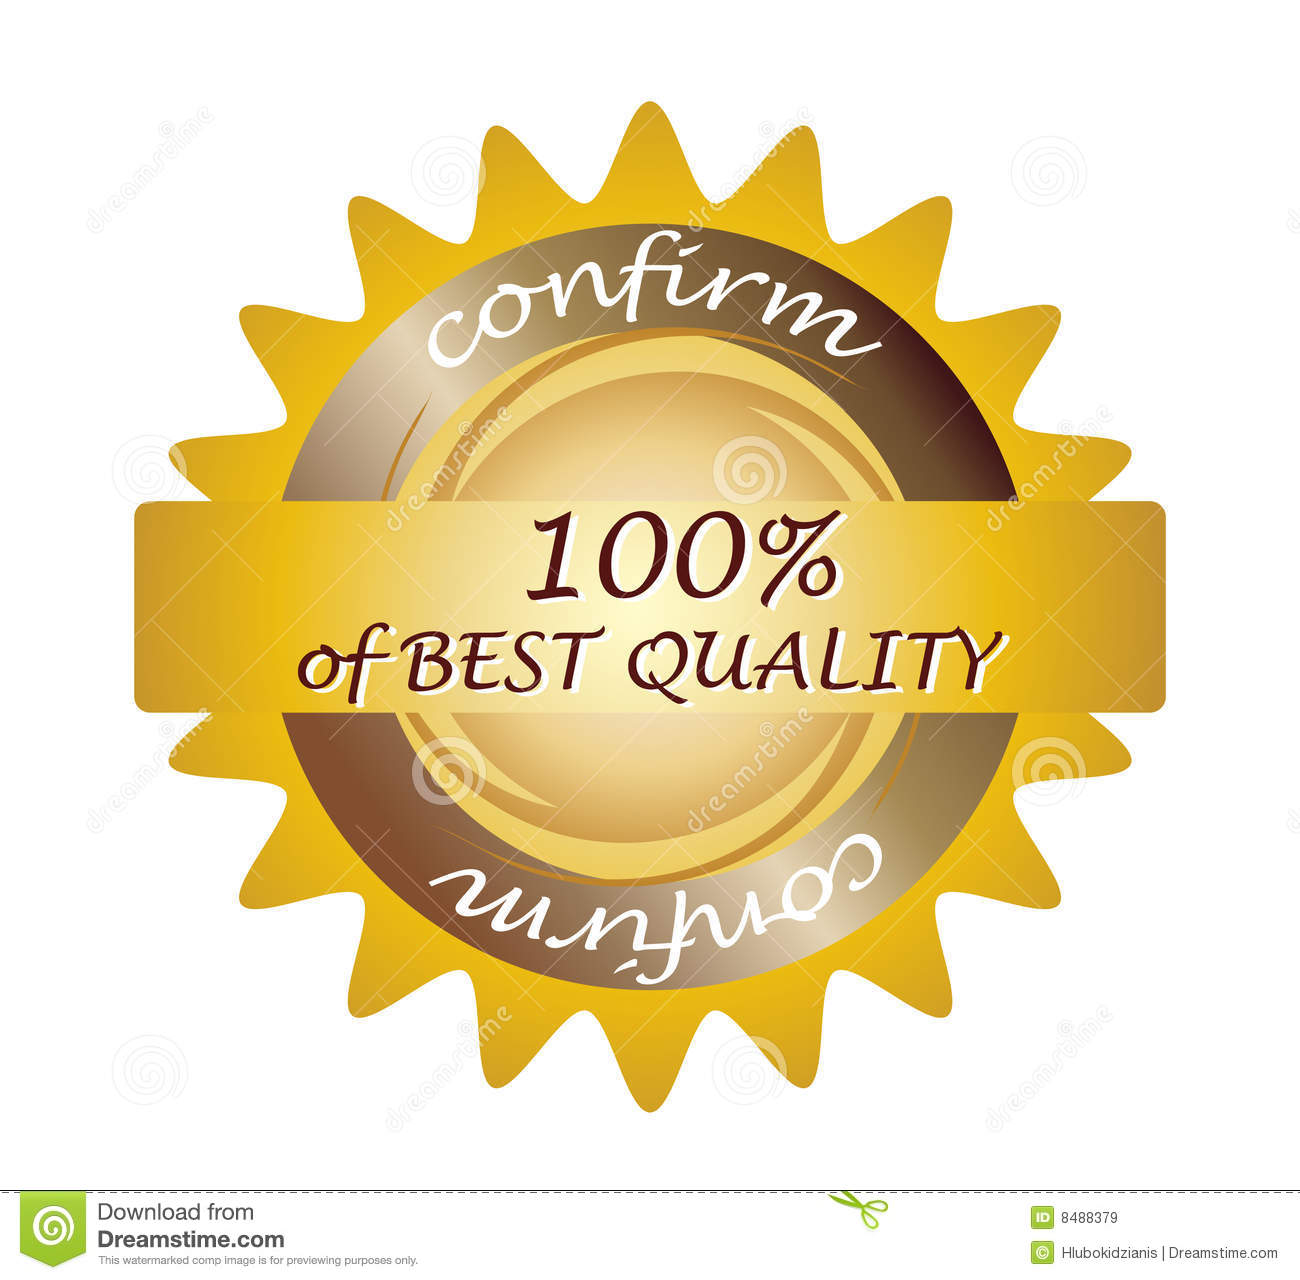 Seal 100  Quality Royalty Free Stock Images   Image  8488379